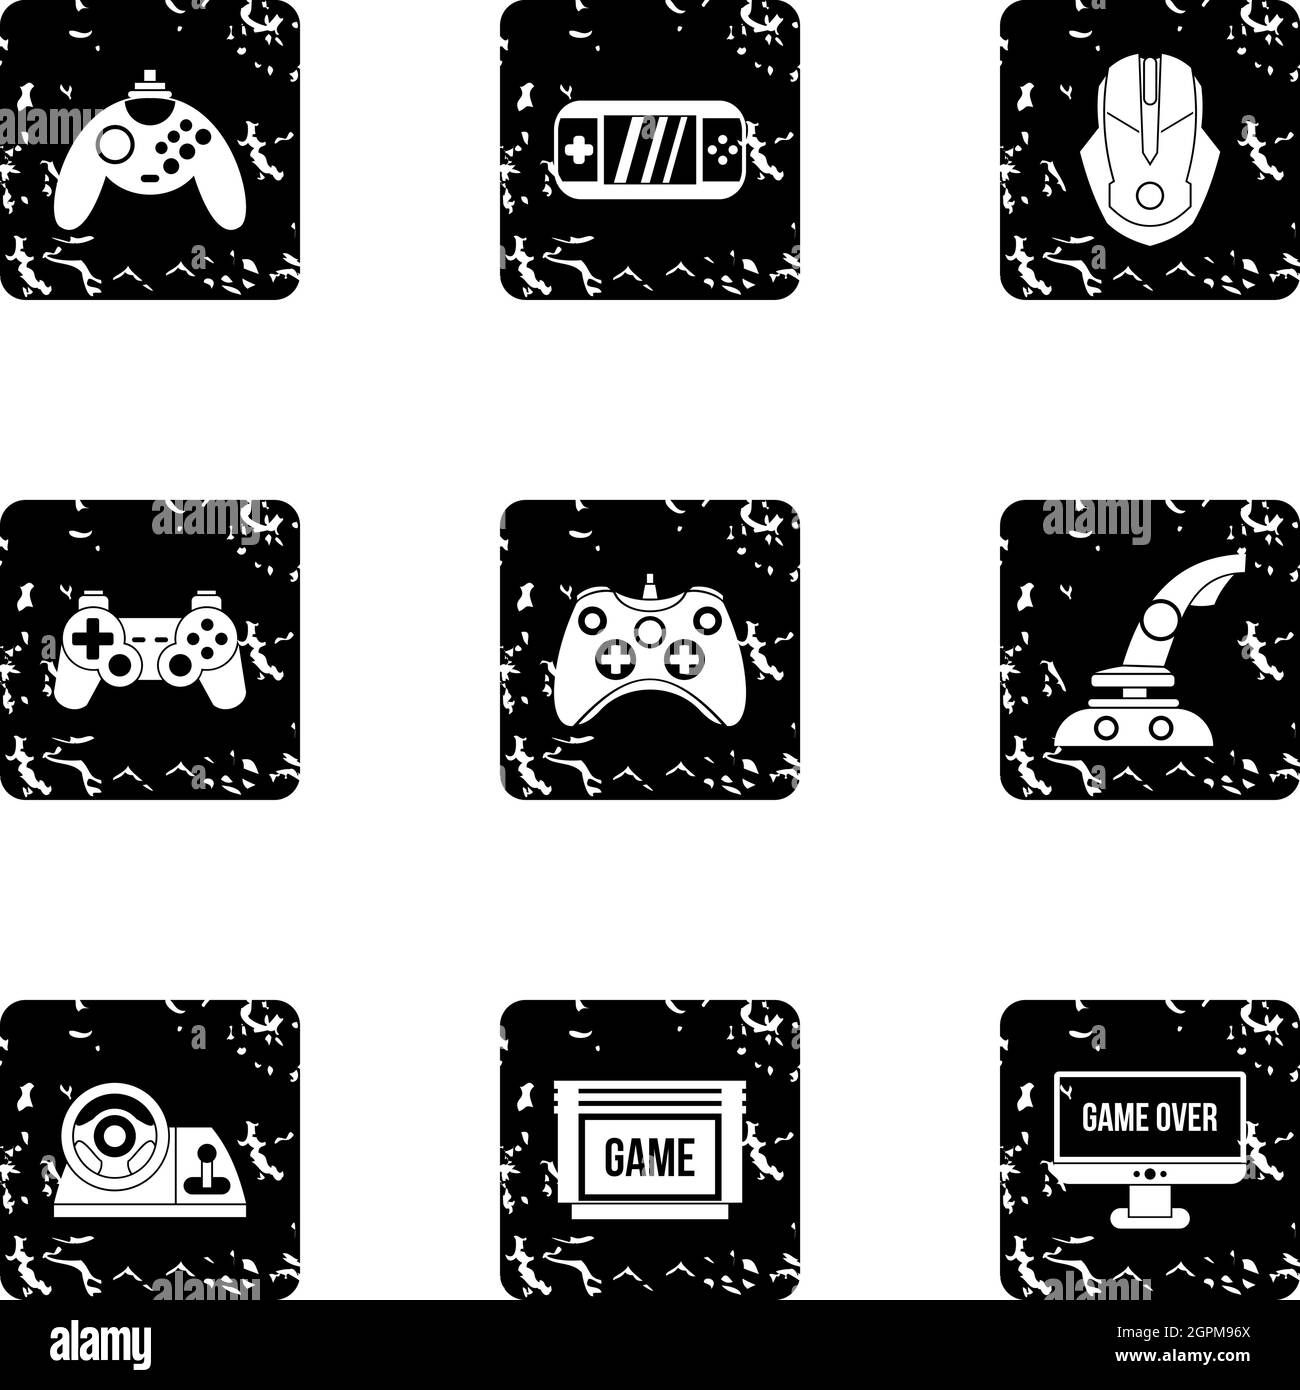 Computer games icons set, grunge style Stock Vector